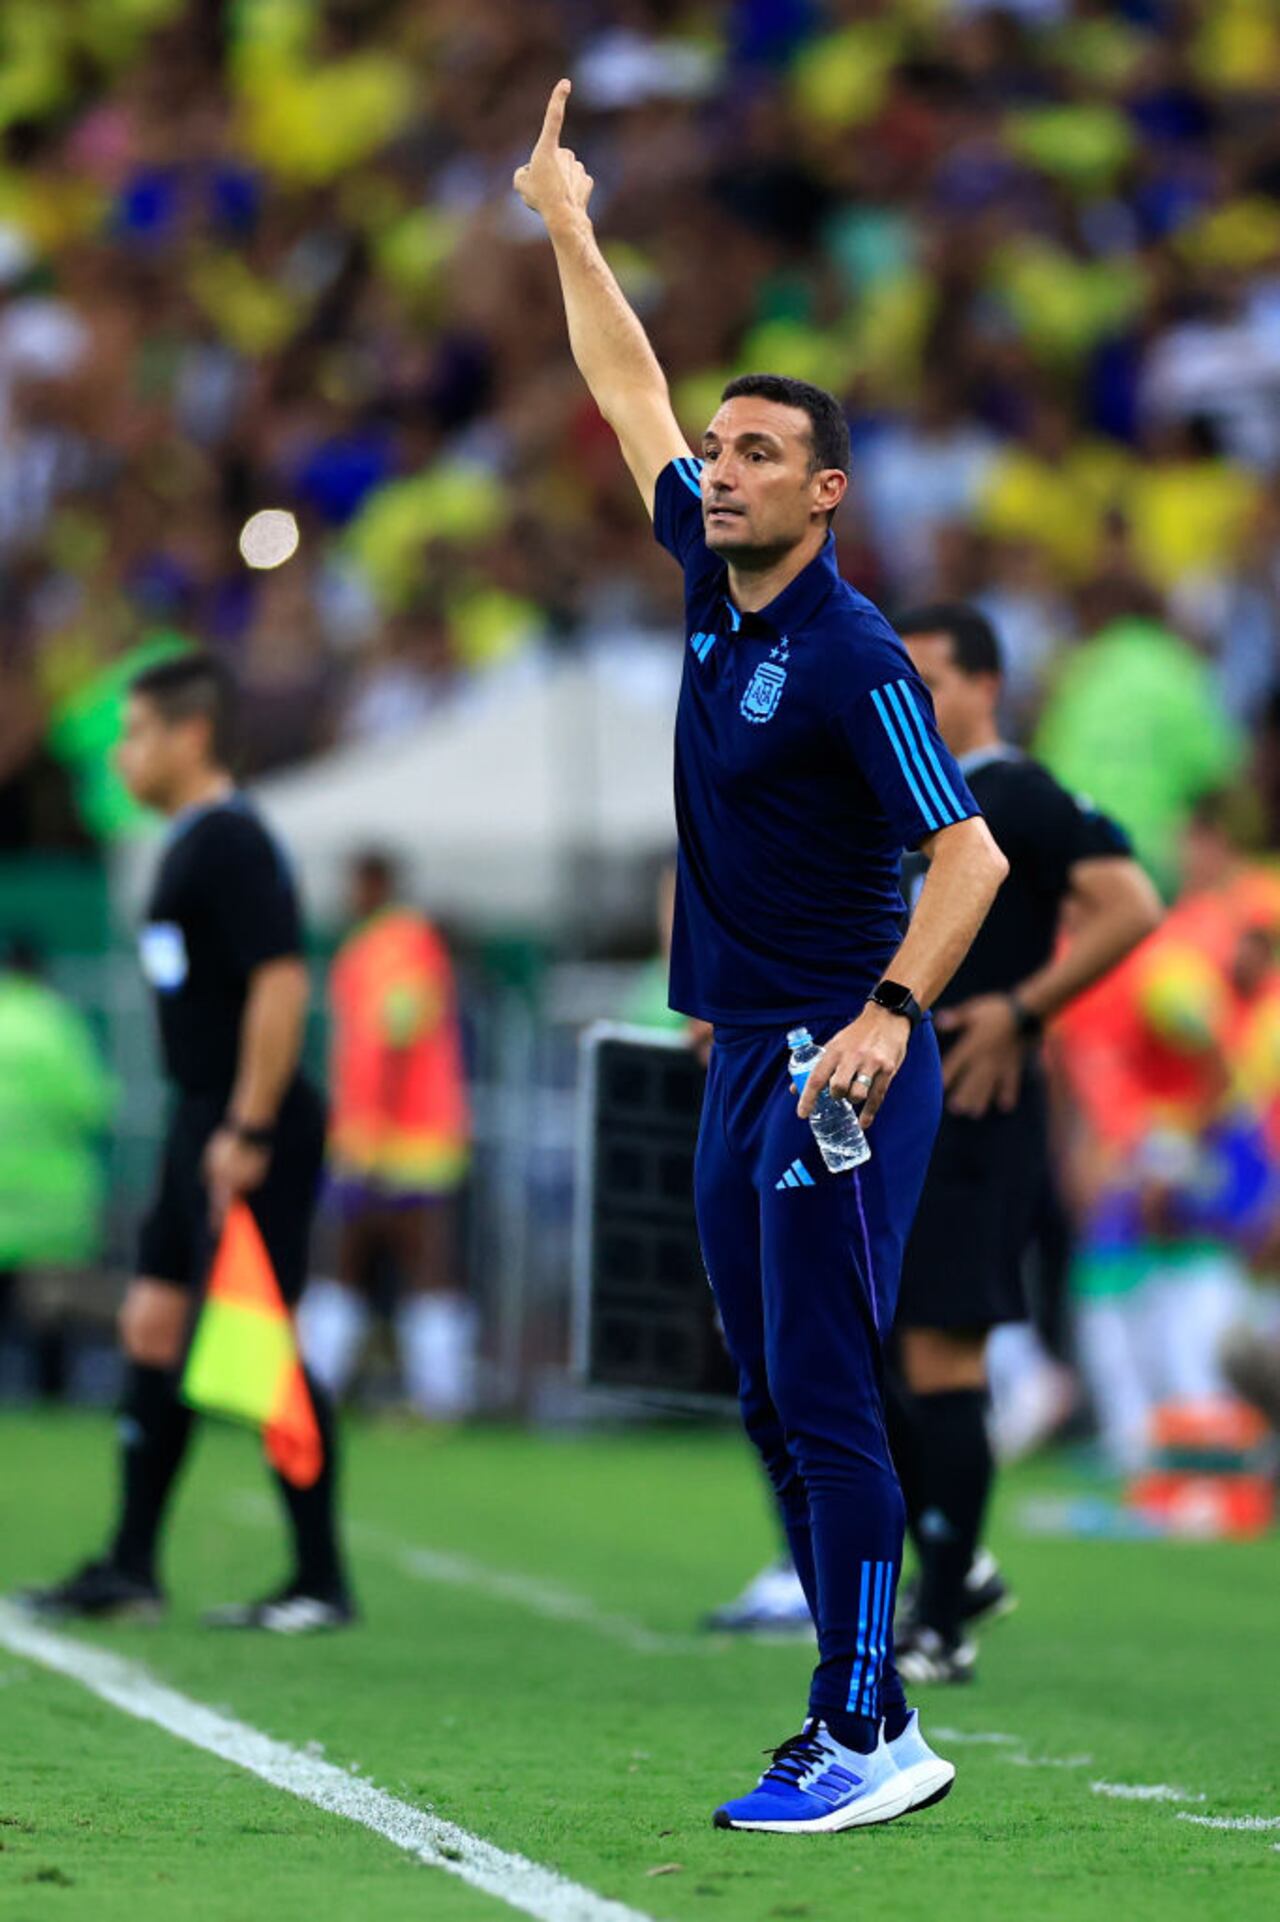 RIO DE JANEIRO, BRAZIL - NOVEMBER 21: Lionel Scaloni, Head Coach of Argentina, gestures during a FIFA World Cup 2026 Qualifier match between Brazil and Argentina at Maracana Stadium on November 21, 2023 in Rio de Janeiro, Brazil. (Photo by Buda Mendes/Getty Images)